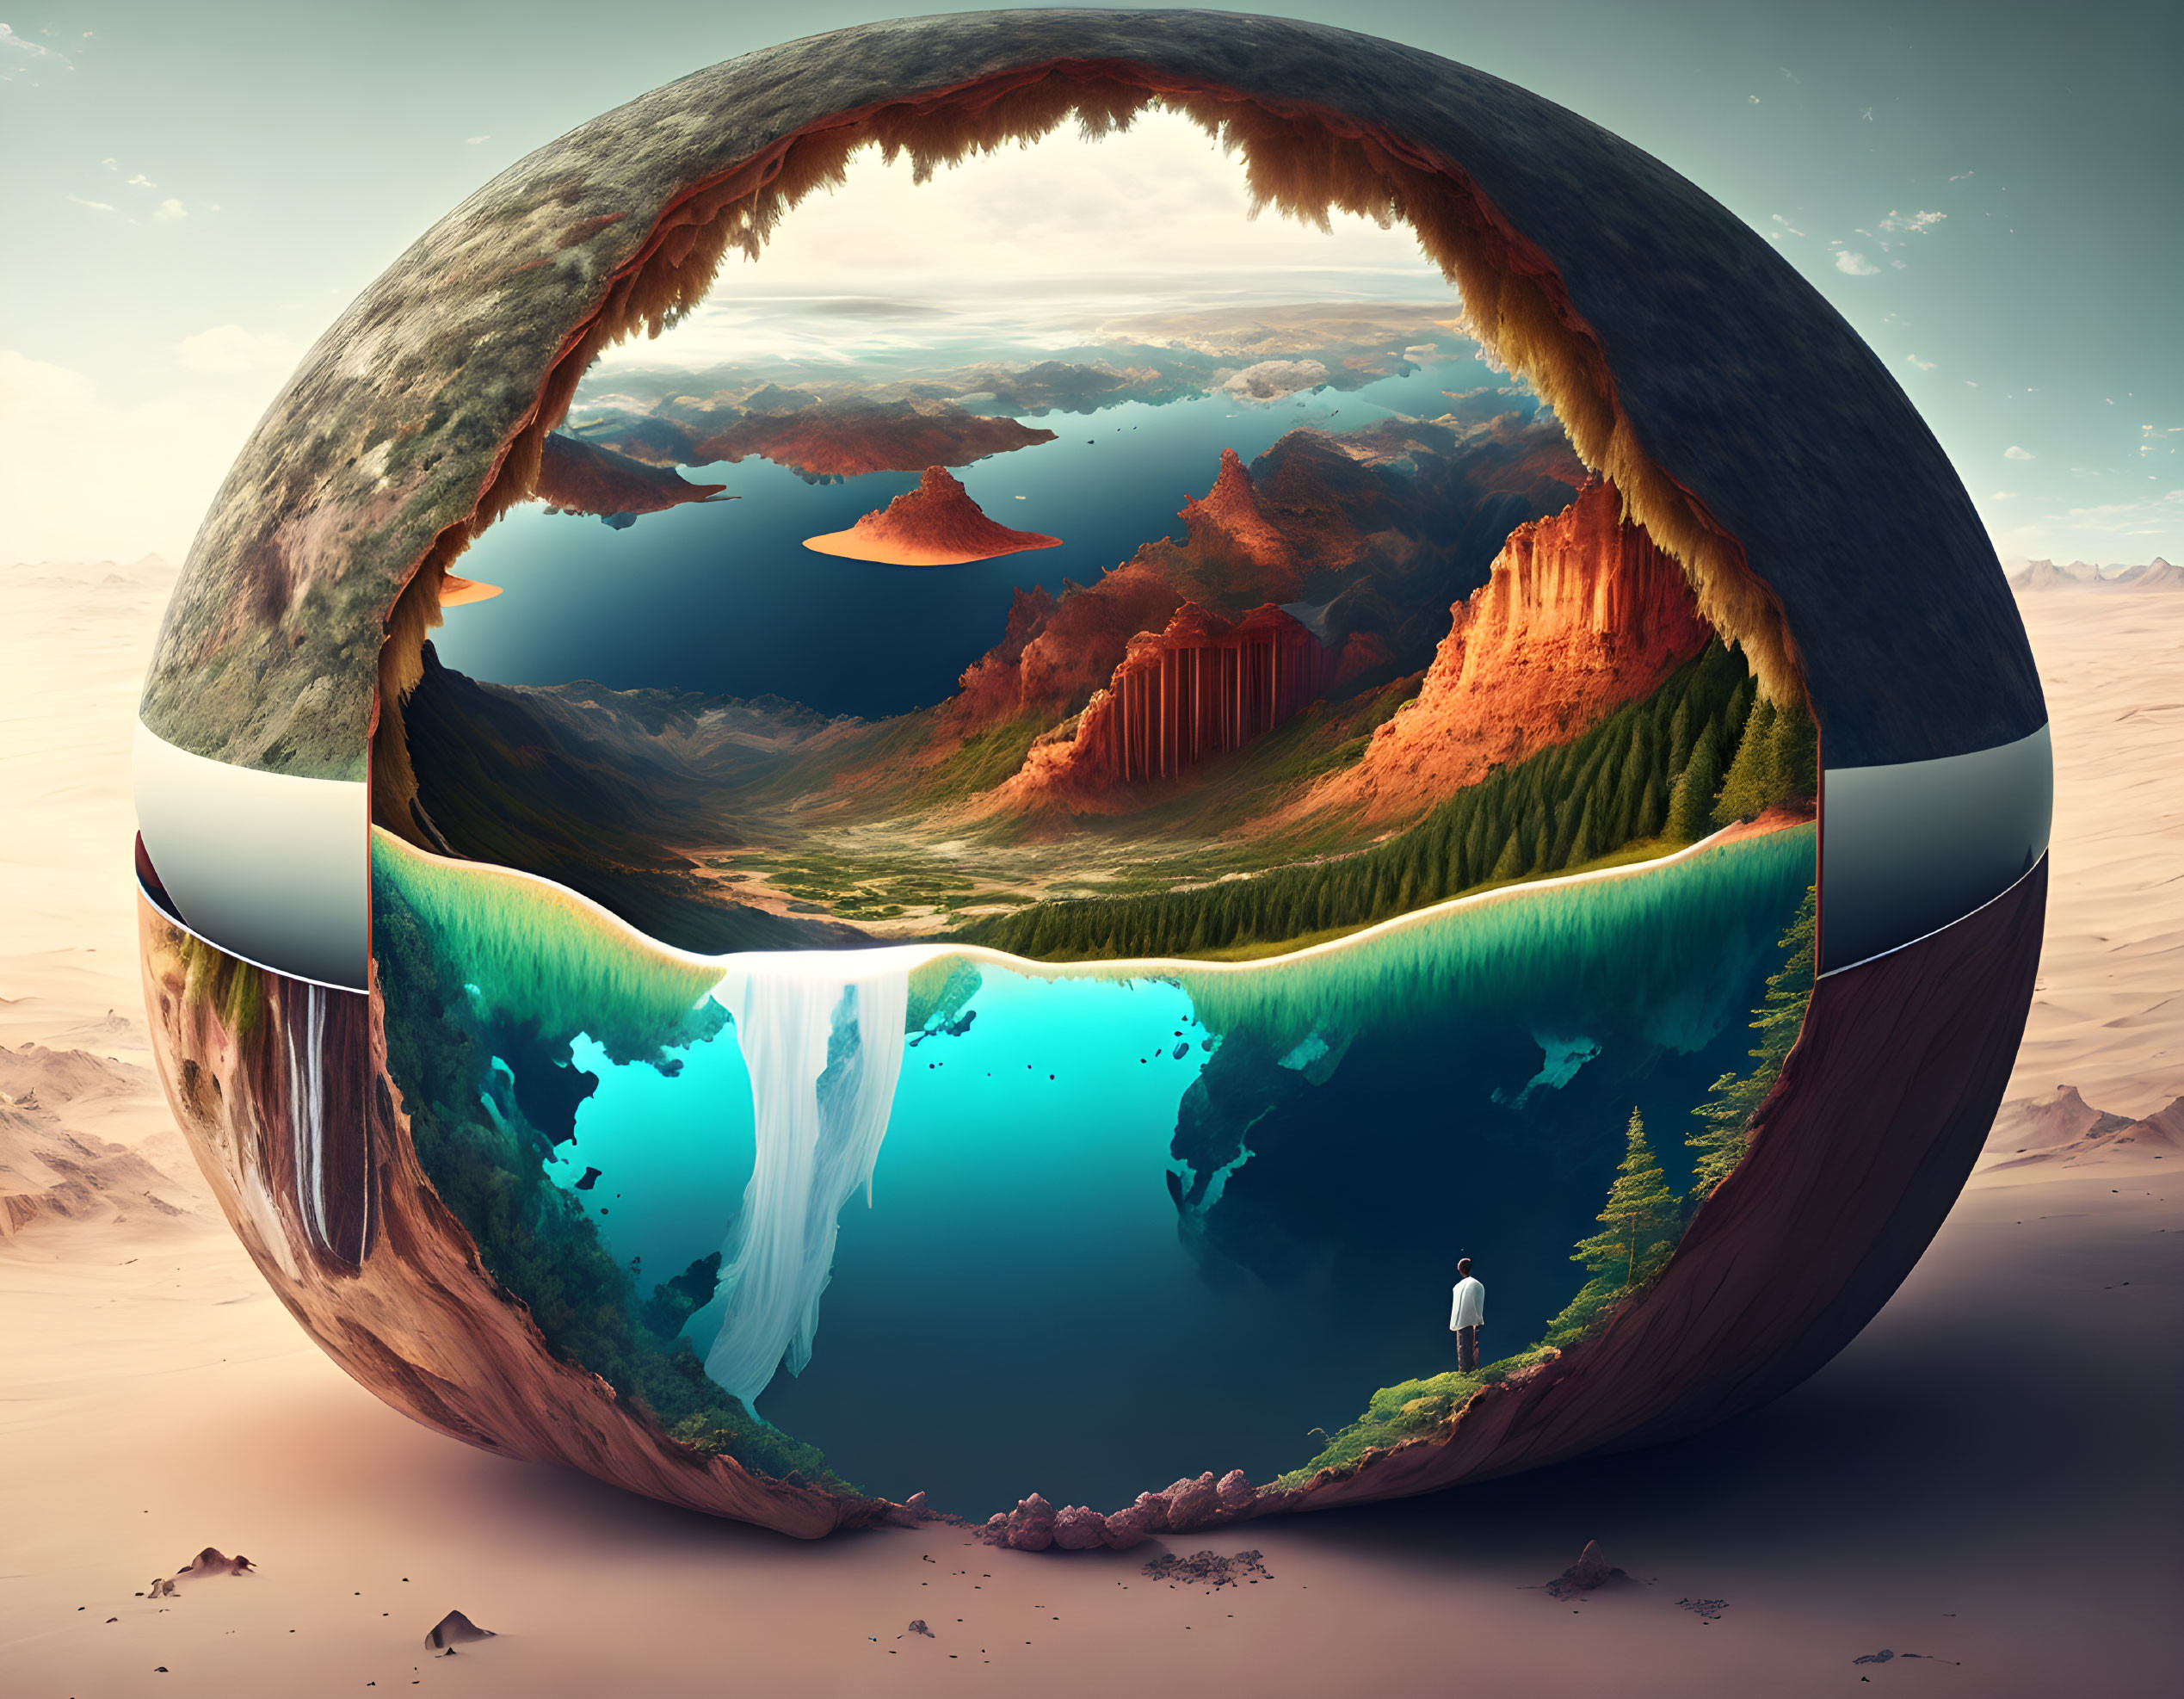 Surreal circular landscape with inverted world, mountains, waterfall, figure by lake